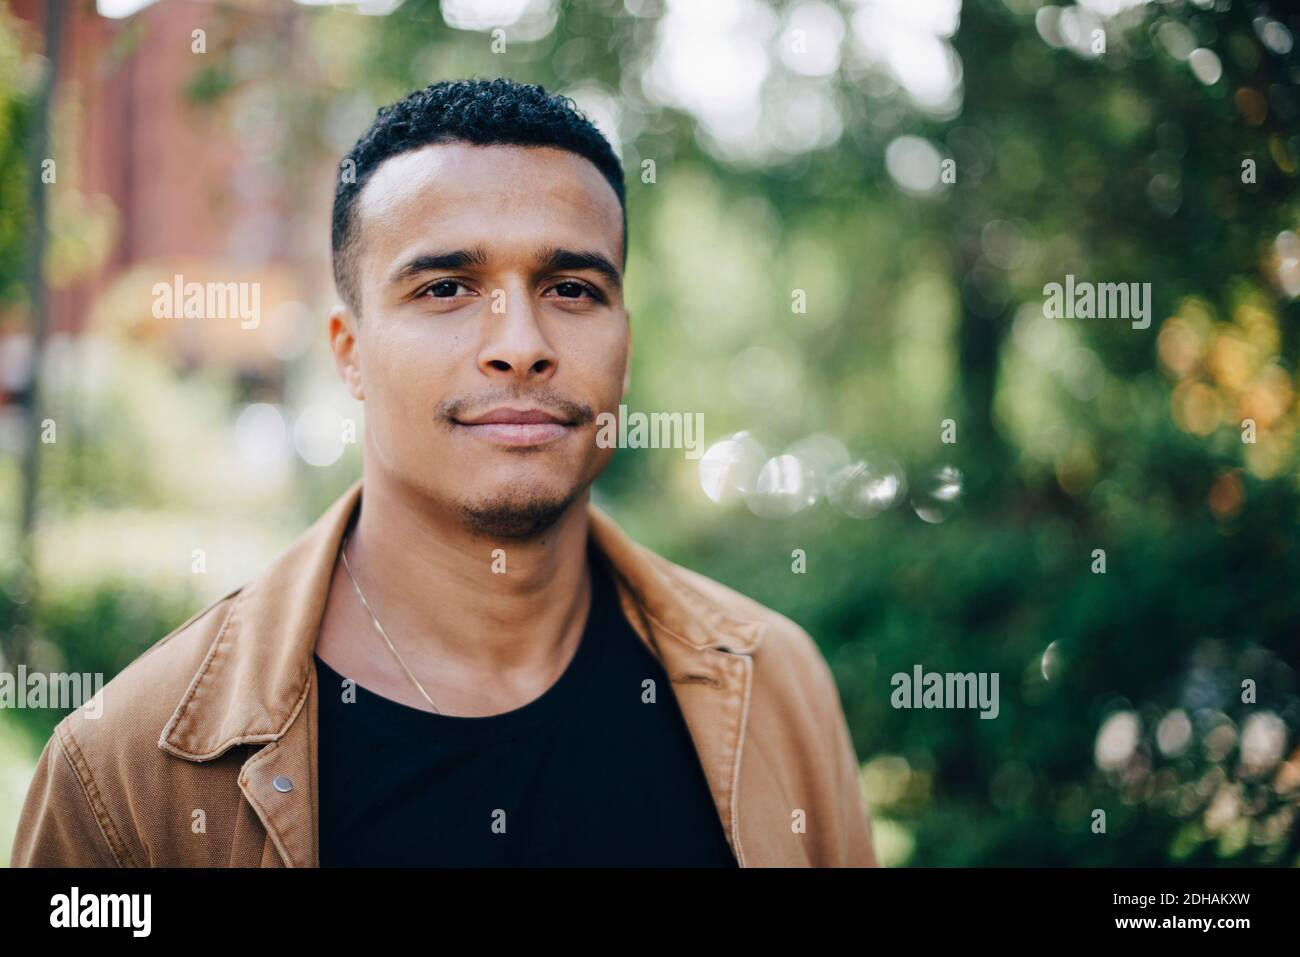 Close-up portrait of man wearing brown jacket standing by plant Stock Photo